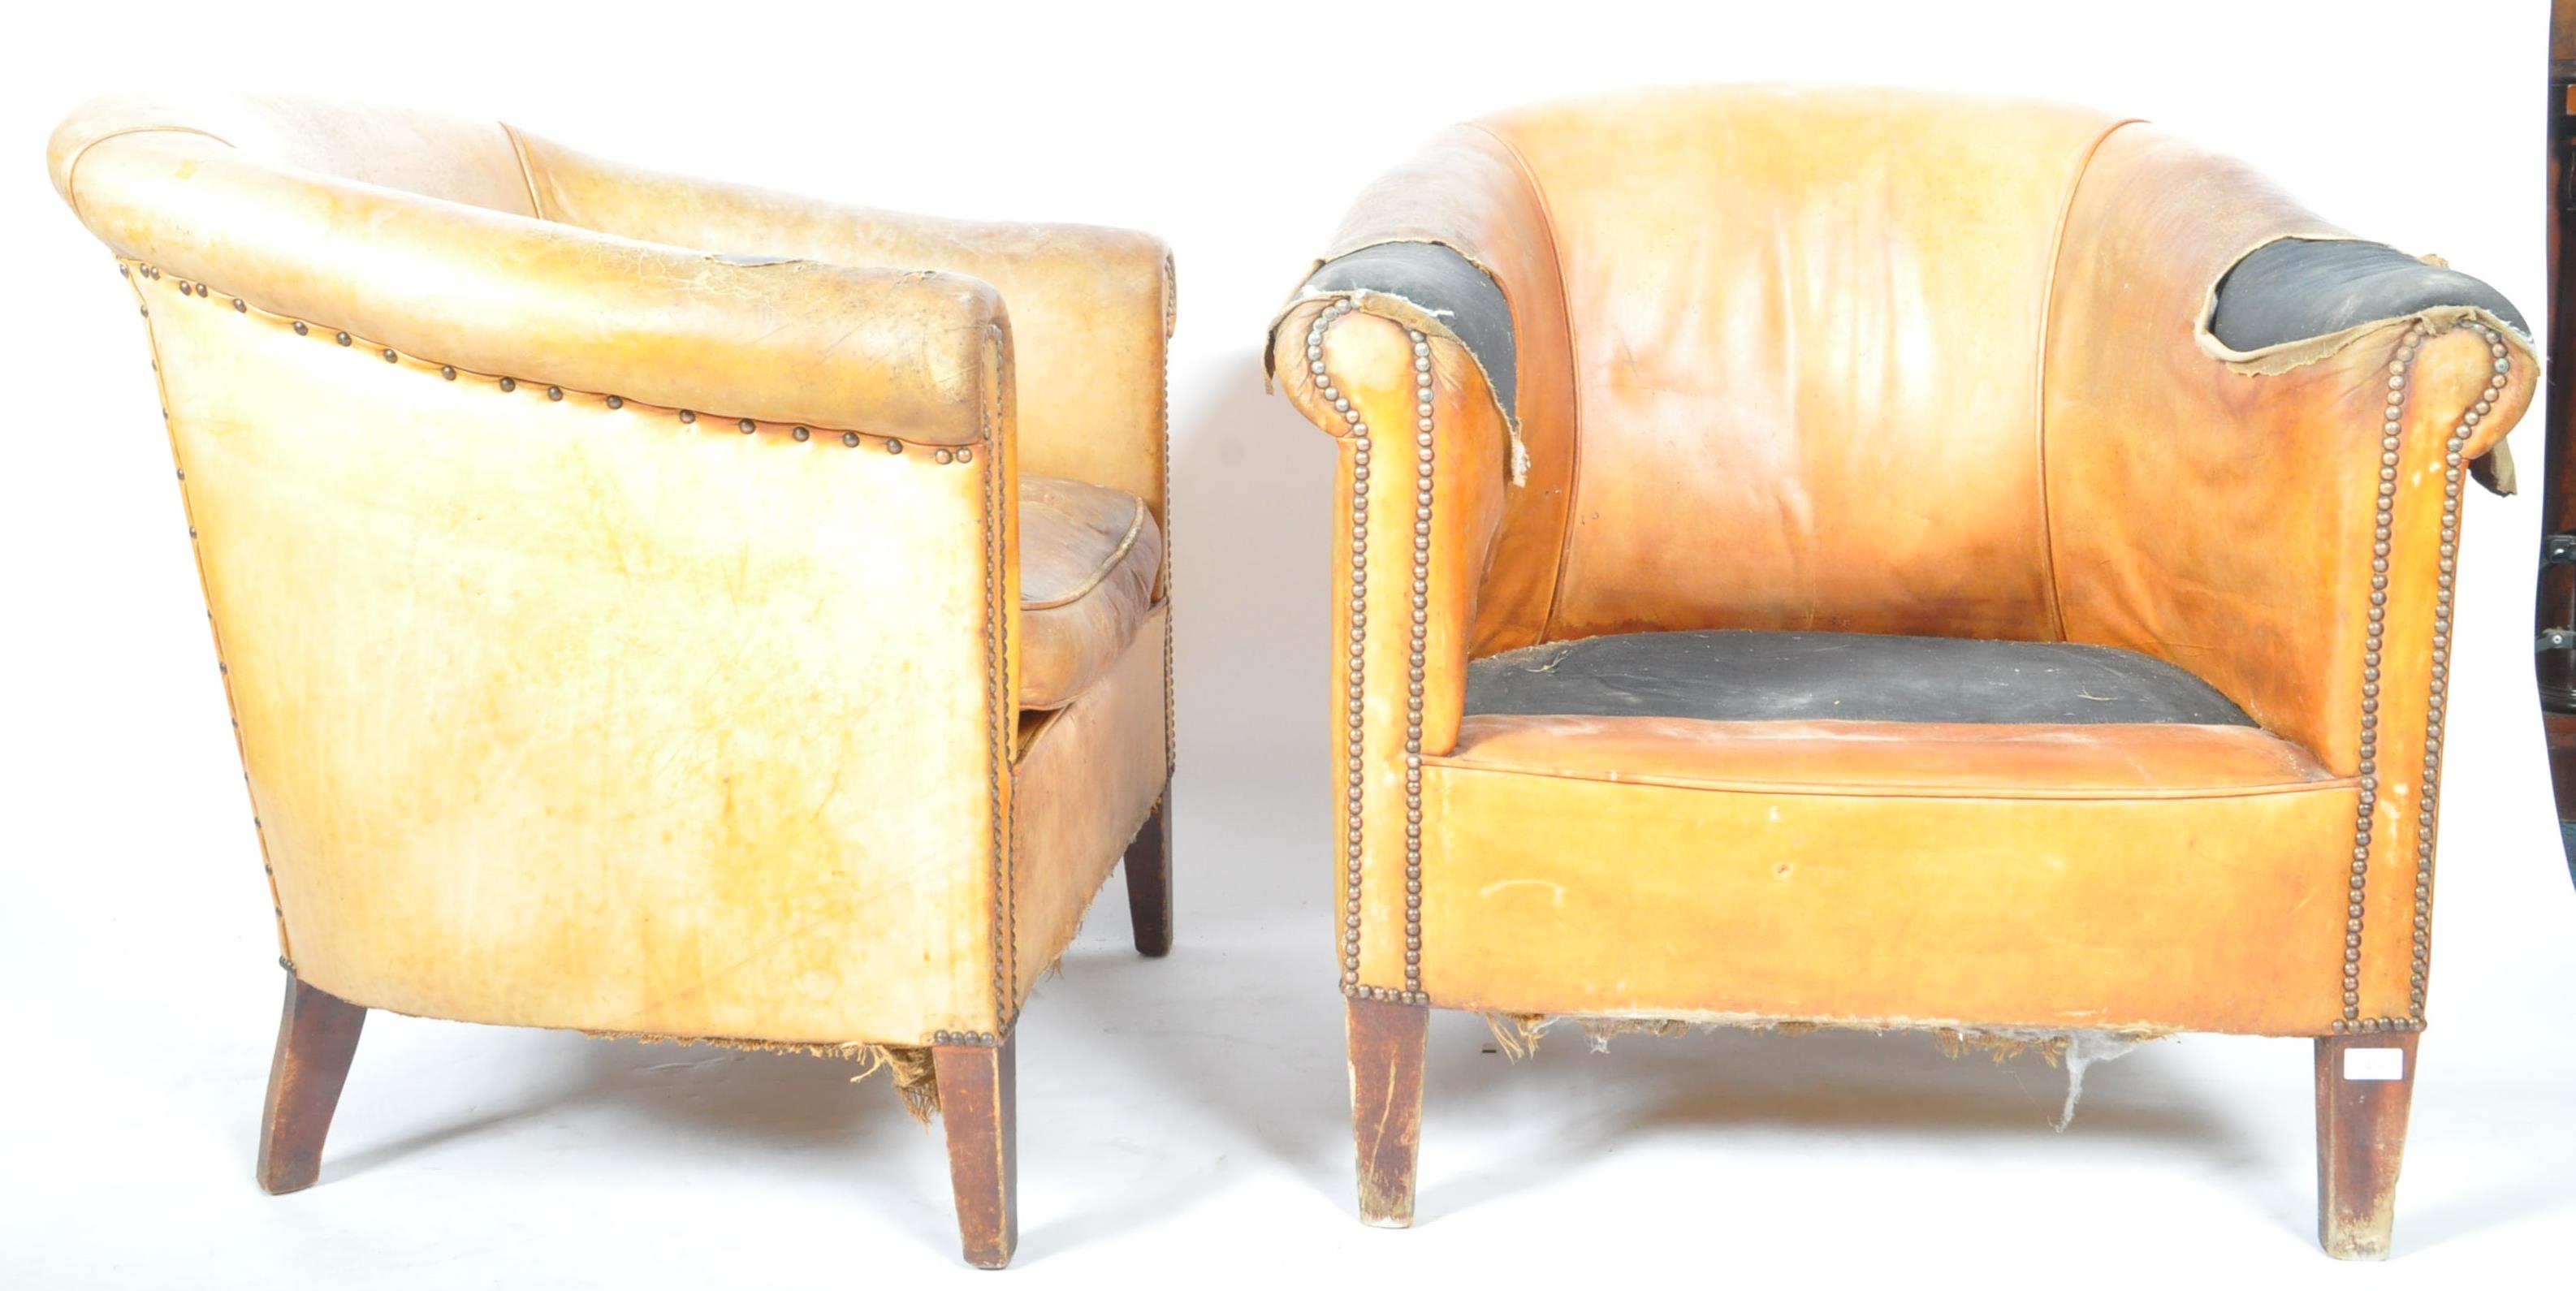 PAIR OF DUTCH SHEEPSKIN TAN BROWN LEATHER CLUB ARMCHAIRS - Image 6 of 7